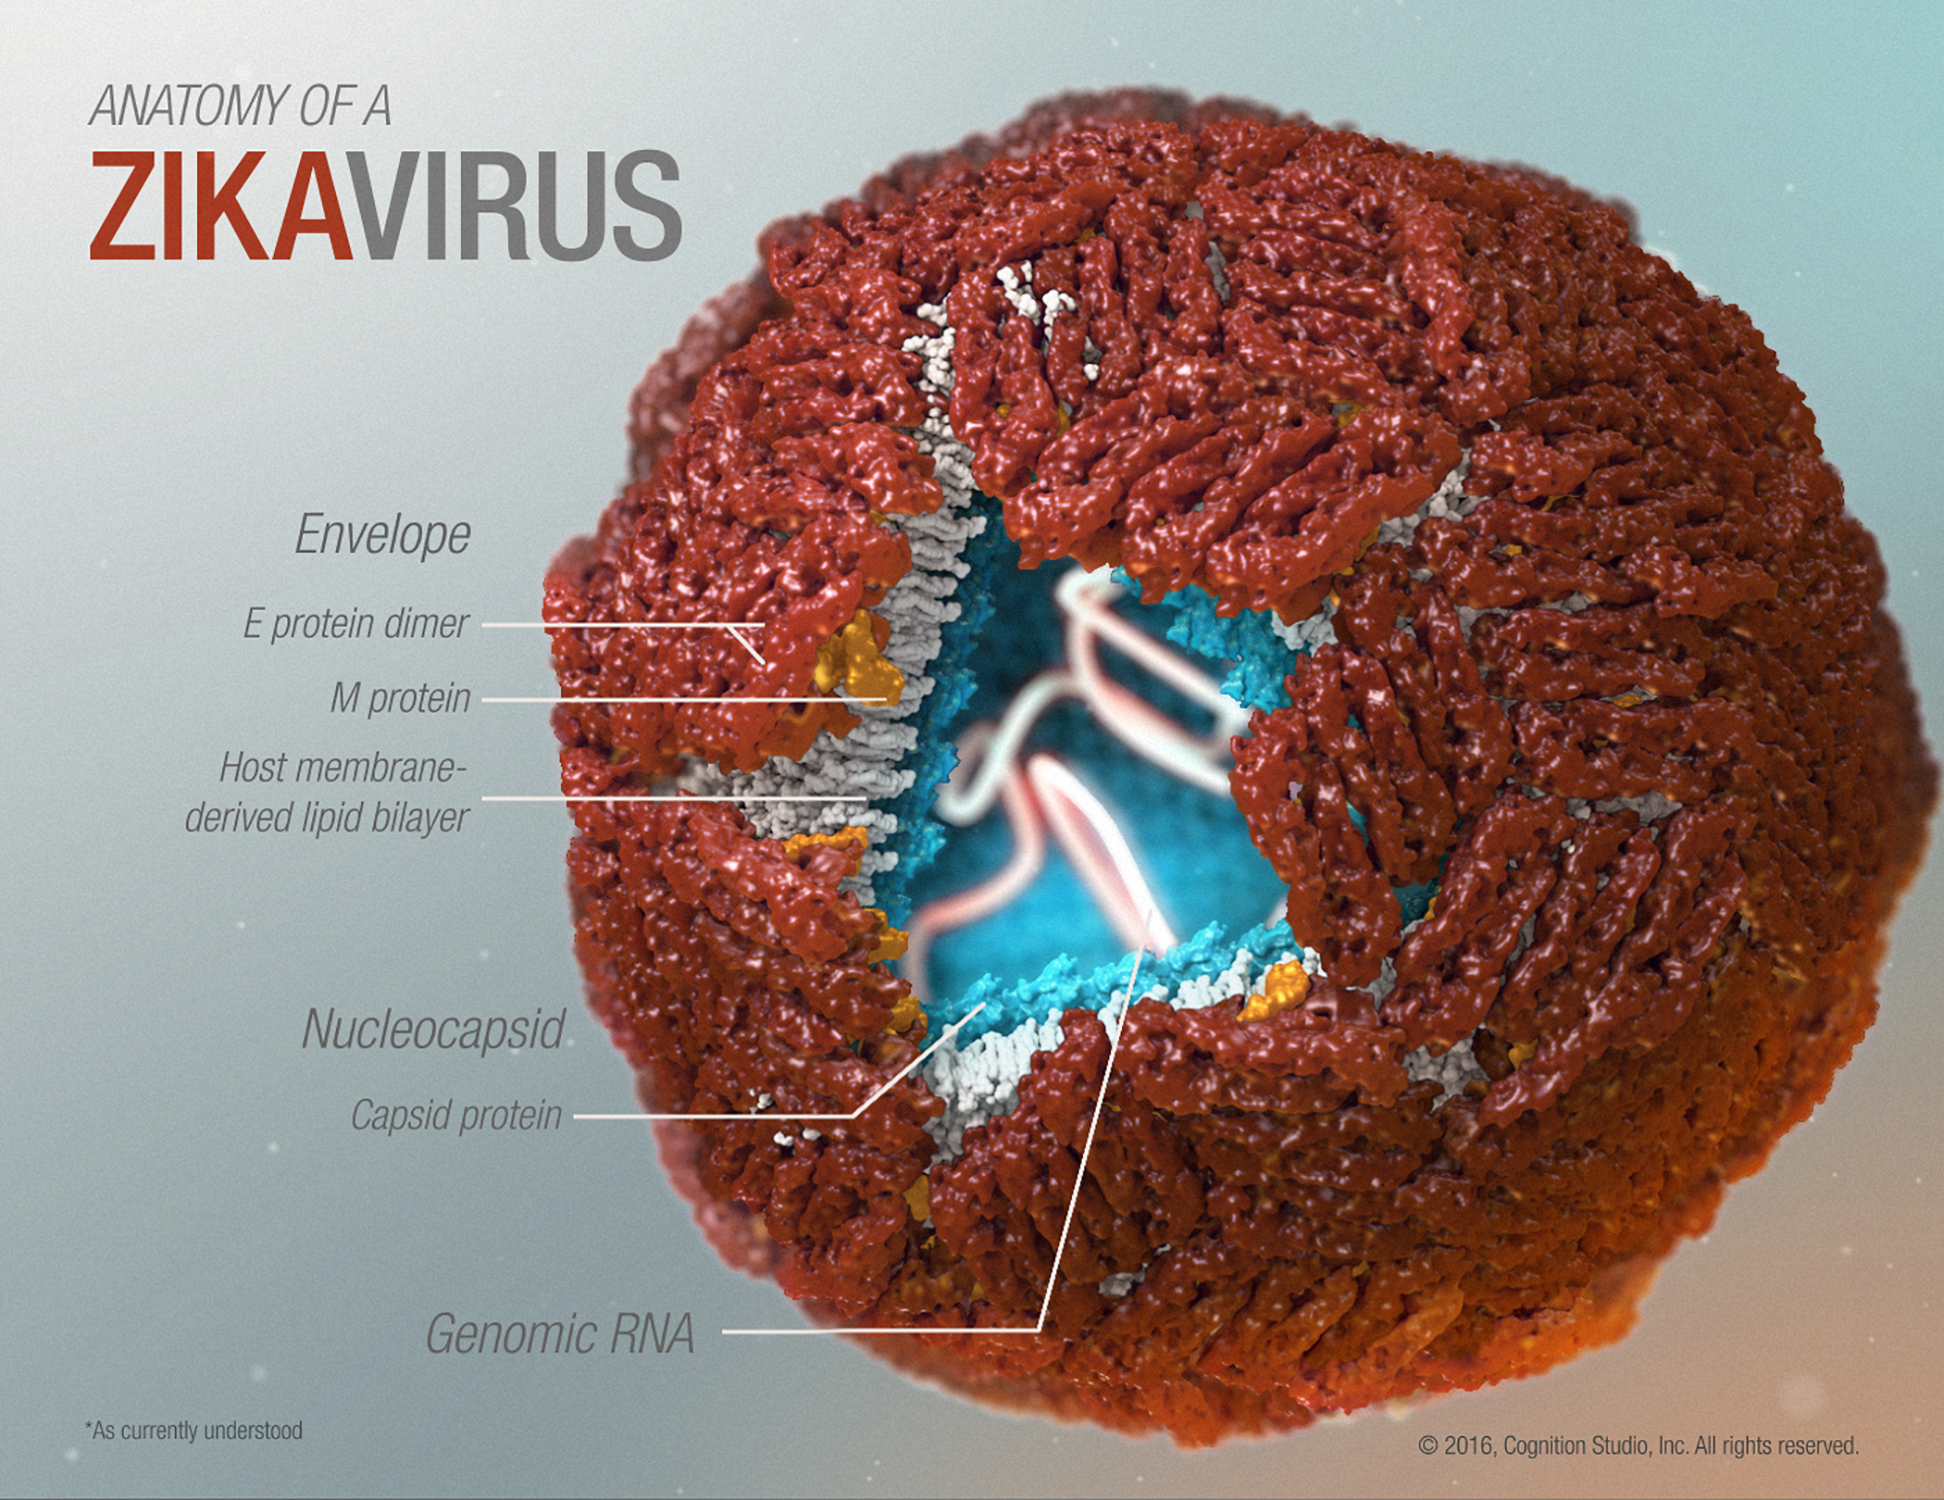 Visual layout provides information about the Zika virus anatomy as currently understood with a high quality 3D model.